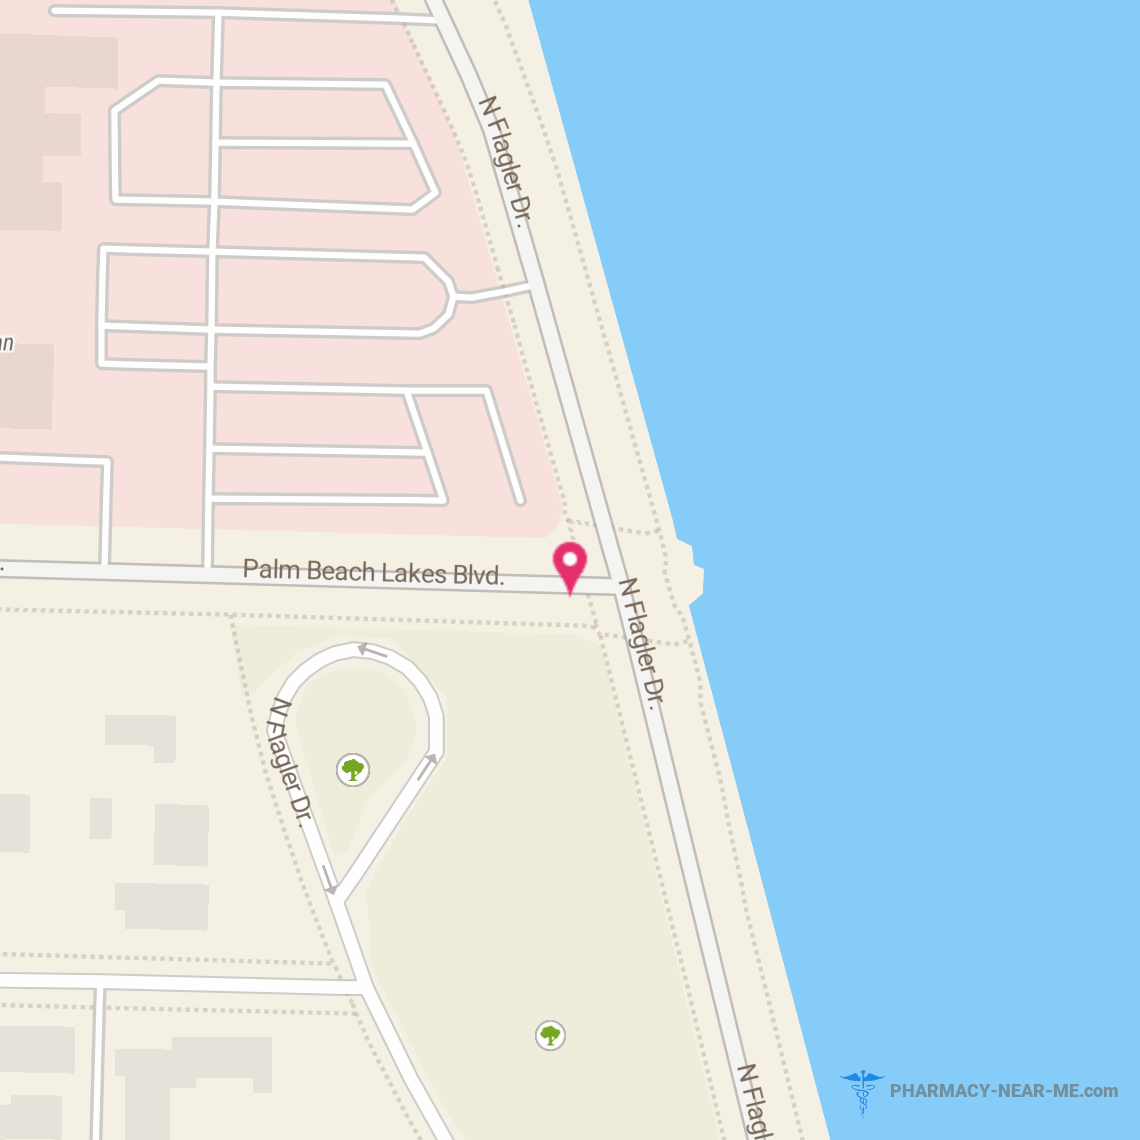 PALM BEACH CANCER INSTITUTE, LLC. - Pharmacy Hours, Phone, Reviews & Information: 1309 North Flagler Drive, West Palm Beach, Florida 33401, United States